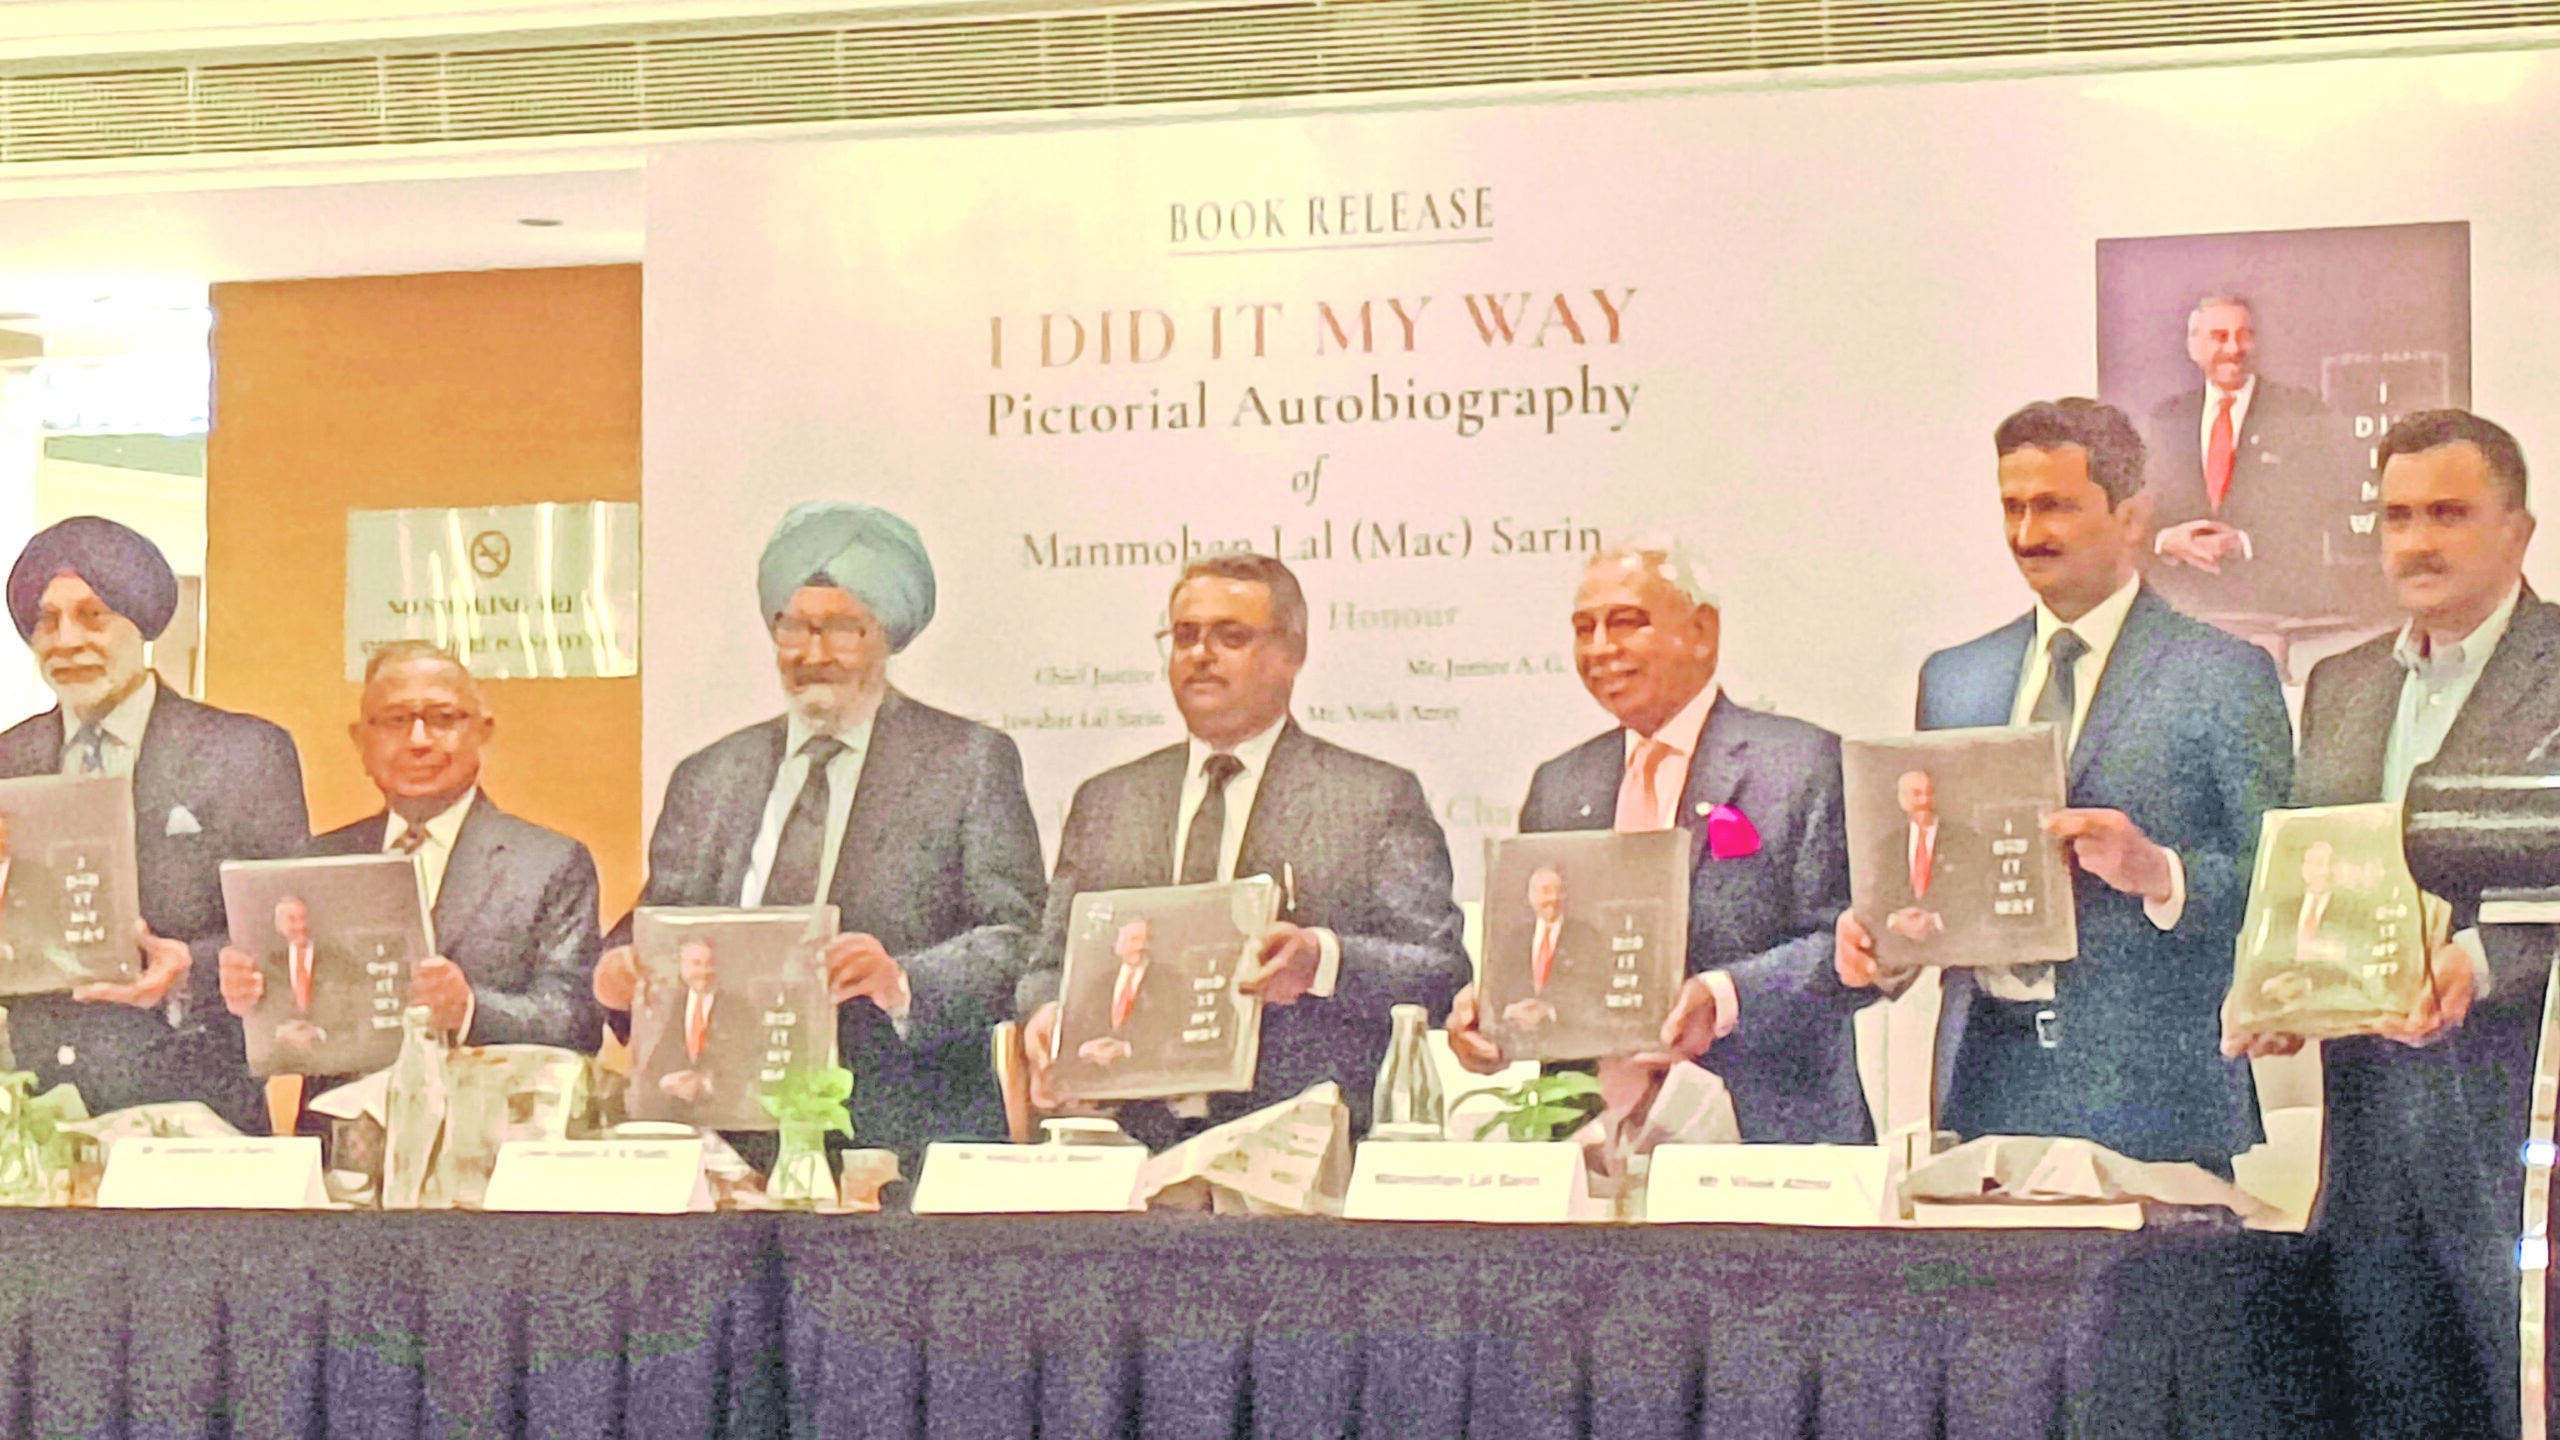 (L-R)Noni Chawla, elder brother Jawahar Sarin exIAS, former Allahabad Chief Justice S.S. Sodhi, chief guest Supreme Court Judge Justice A.S.Masih, Mac Sarin, Vivek Atray, and publisher Sanjay Sethi